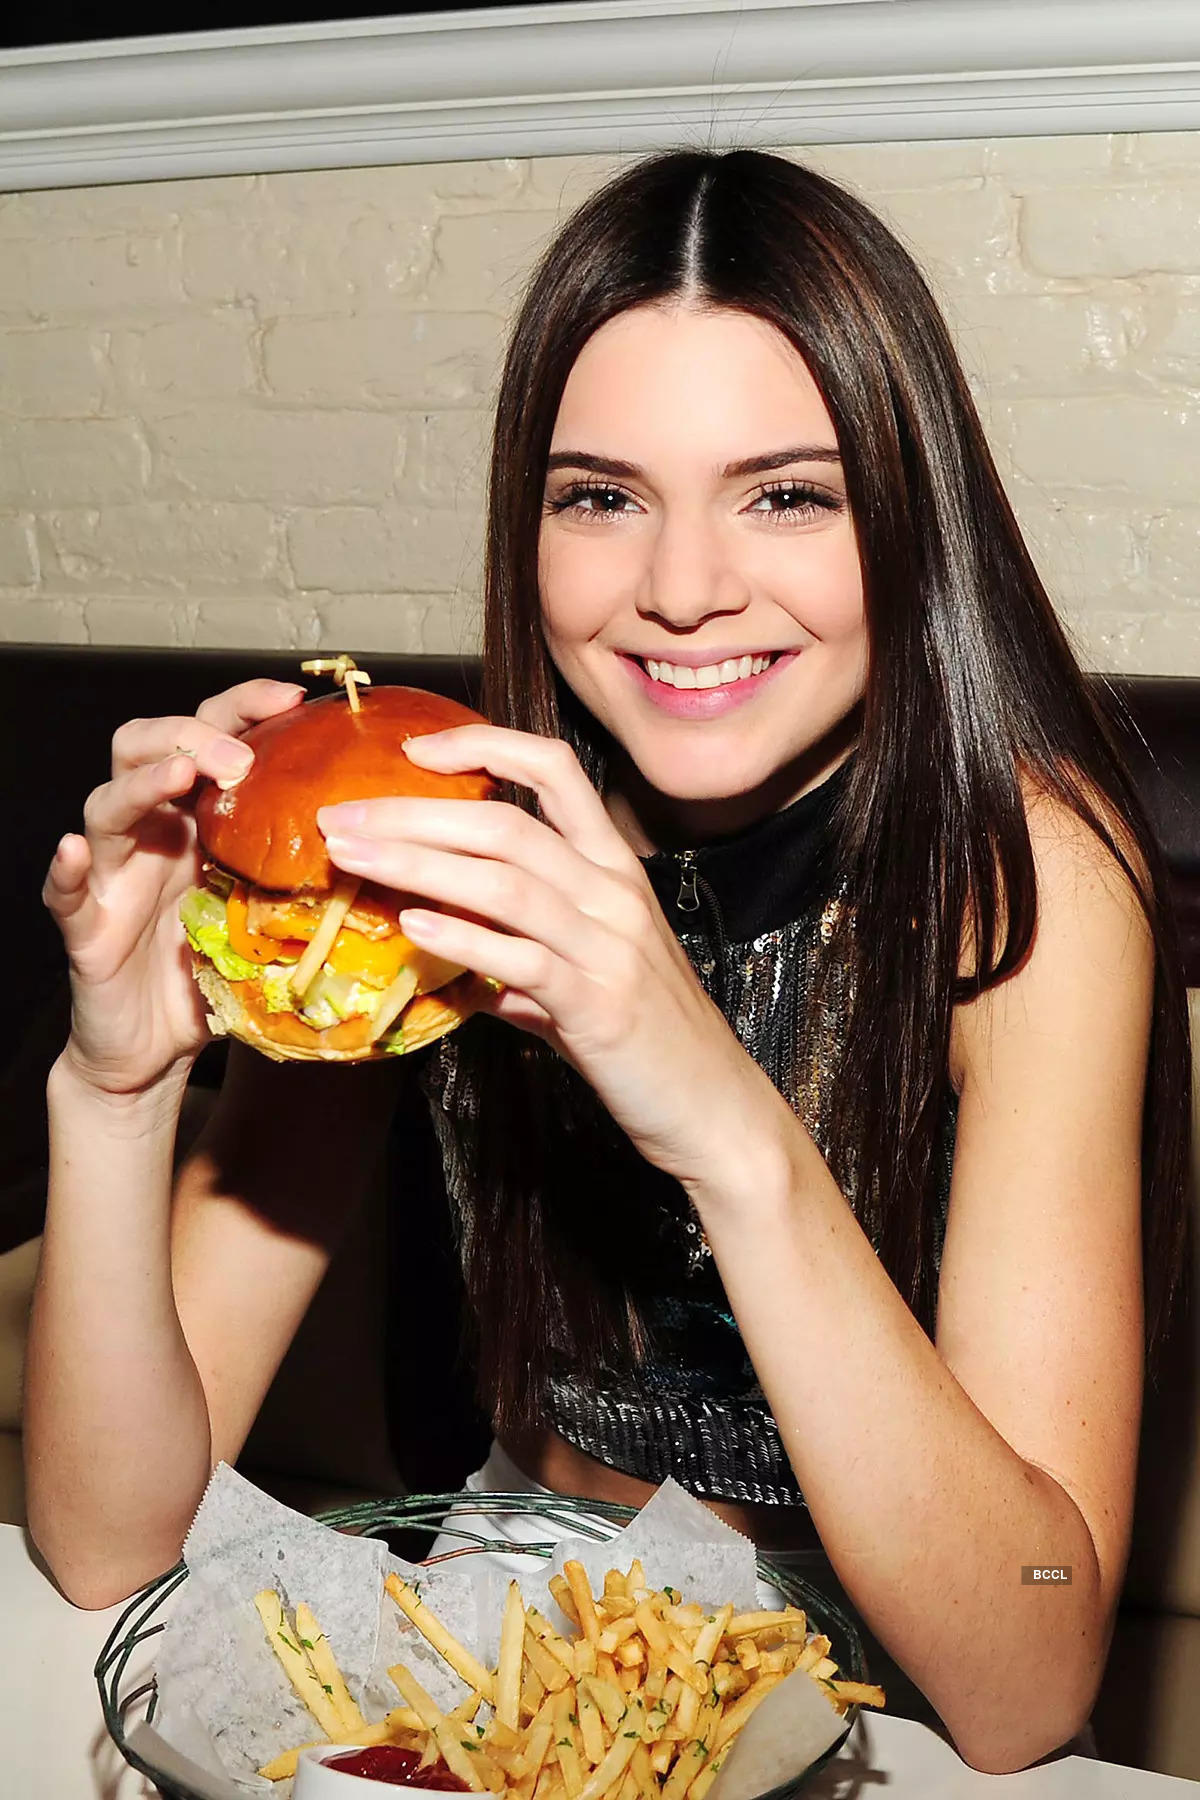 Models who can't do without food!